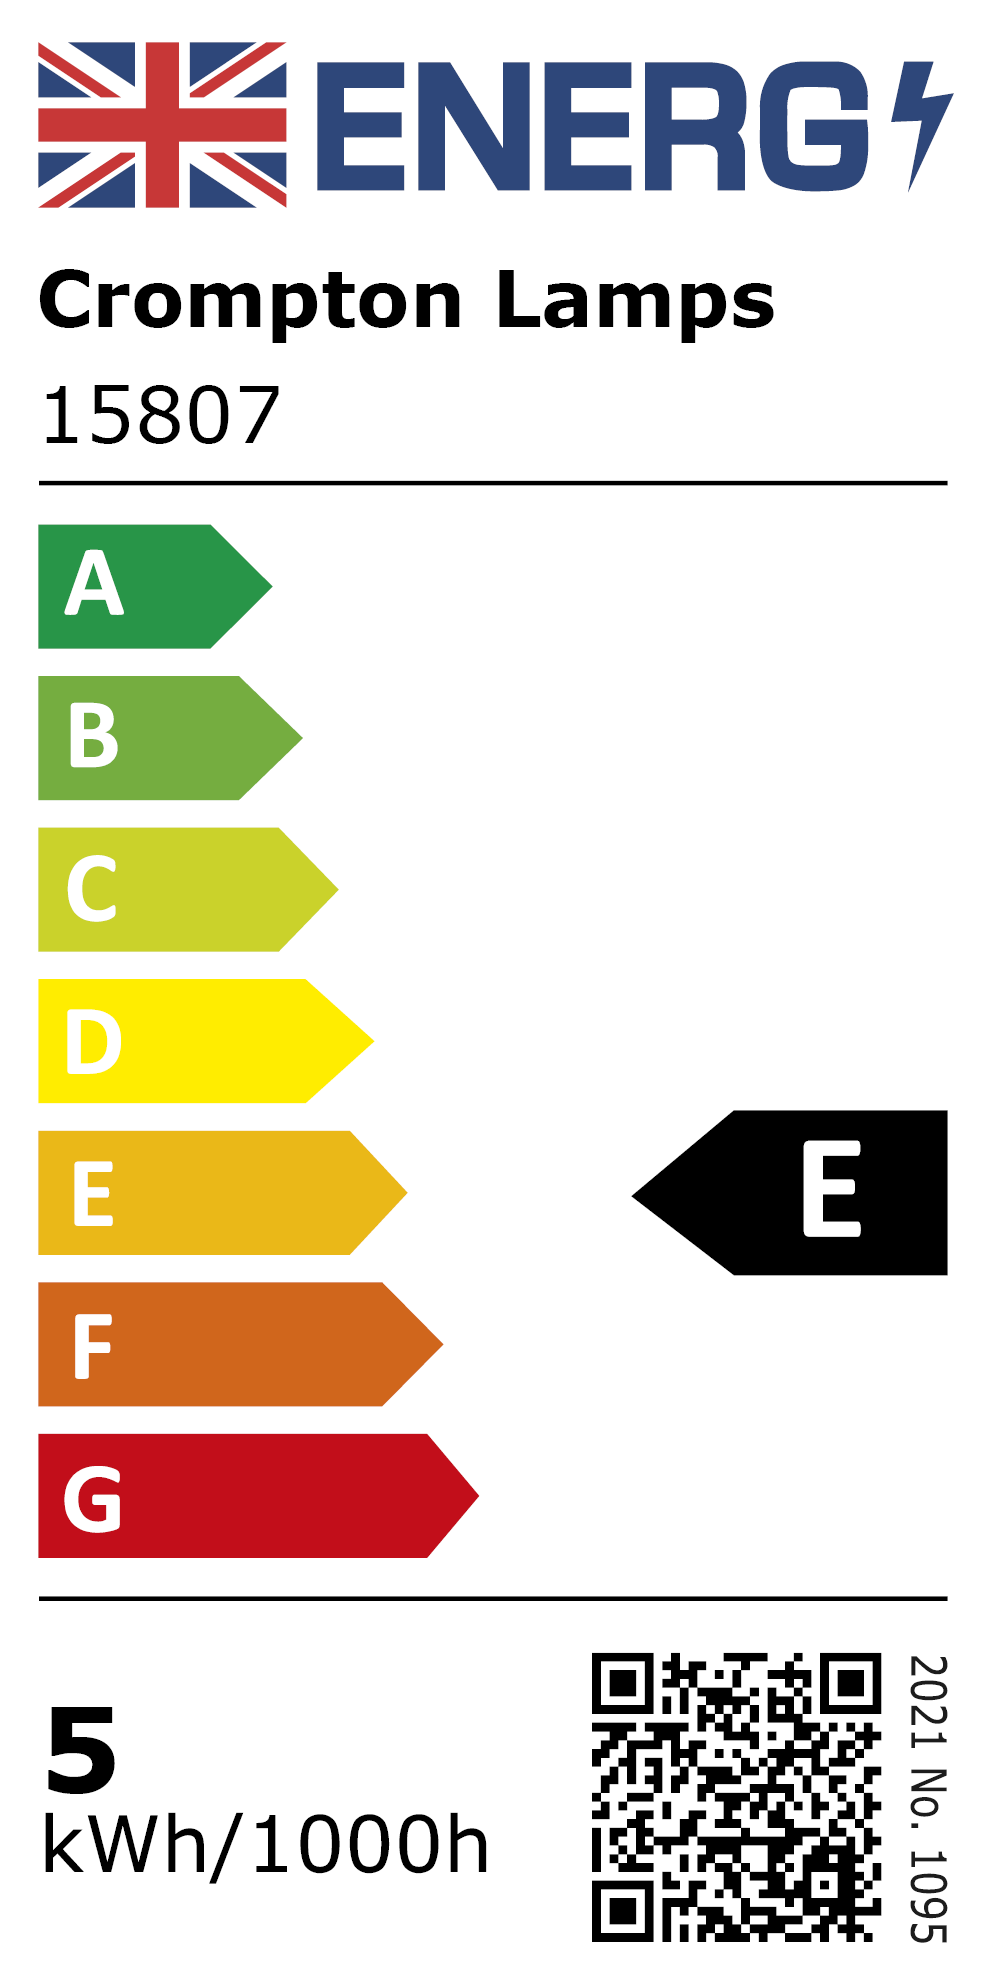 New 2021 Energy Rating Label: MPN 15807